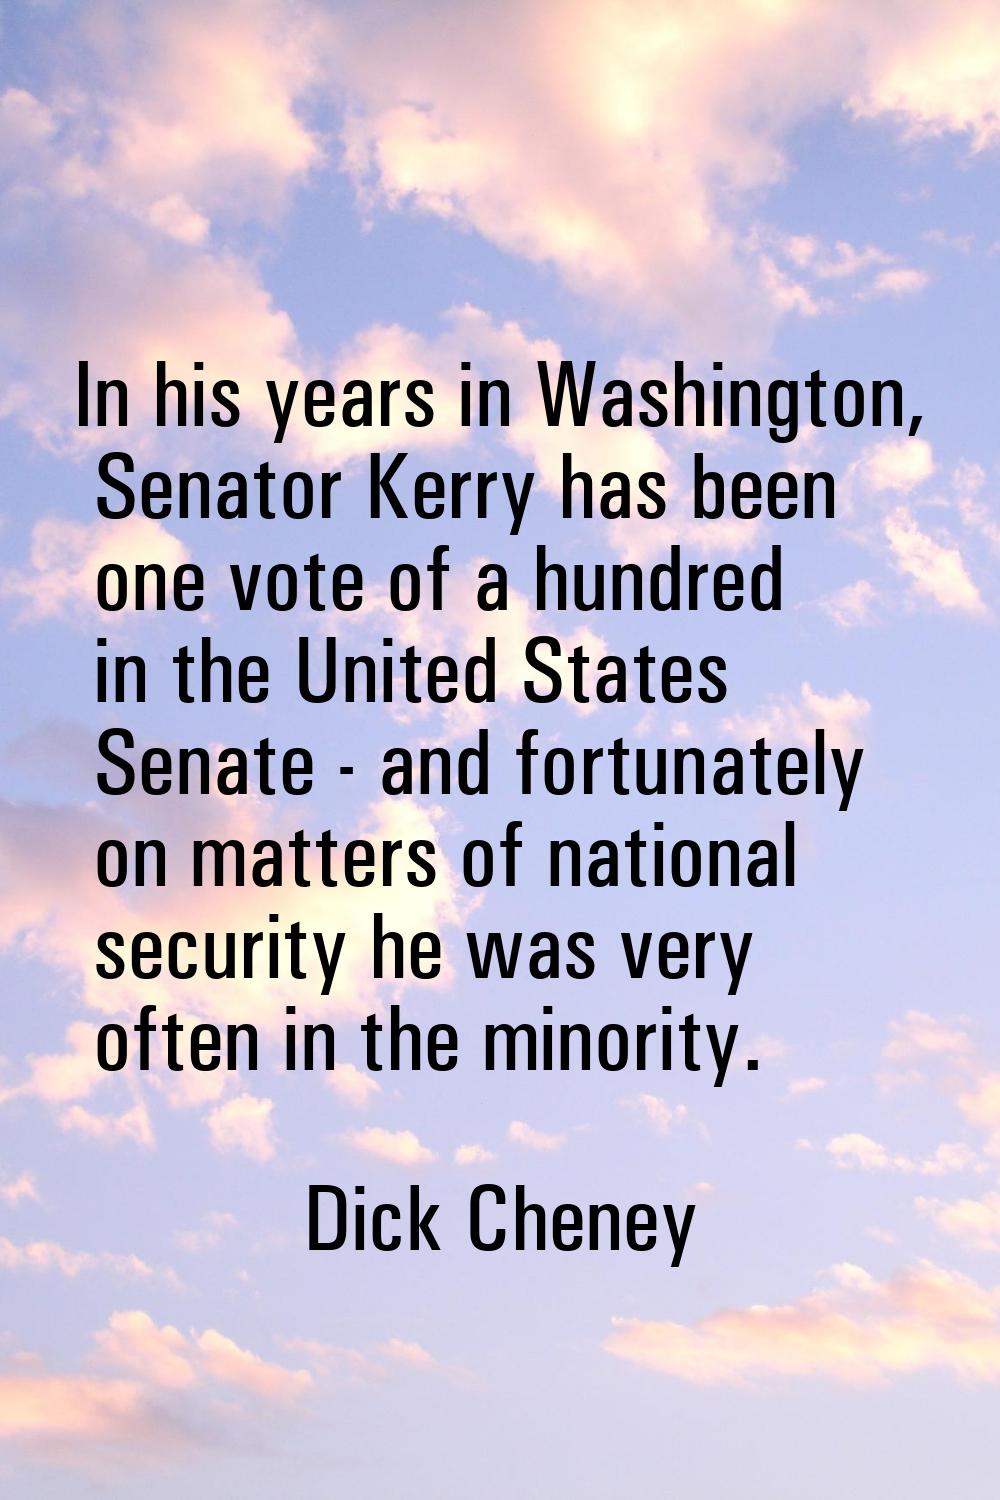 In his years in Washington, Senator Kerry has been one vote of a hundred in the United States Senat